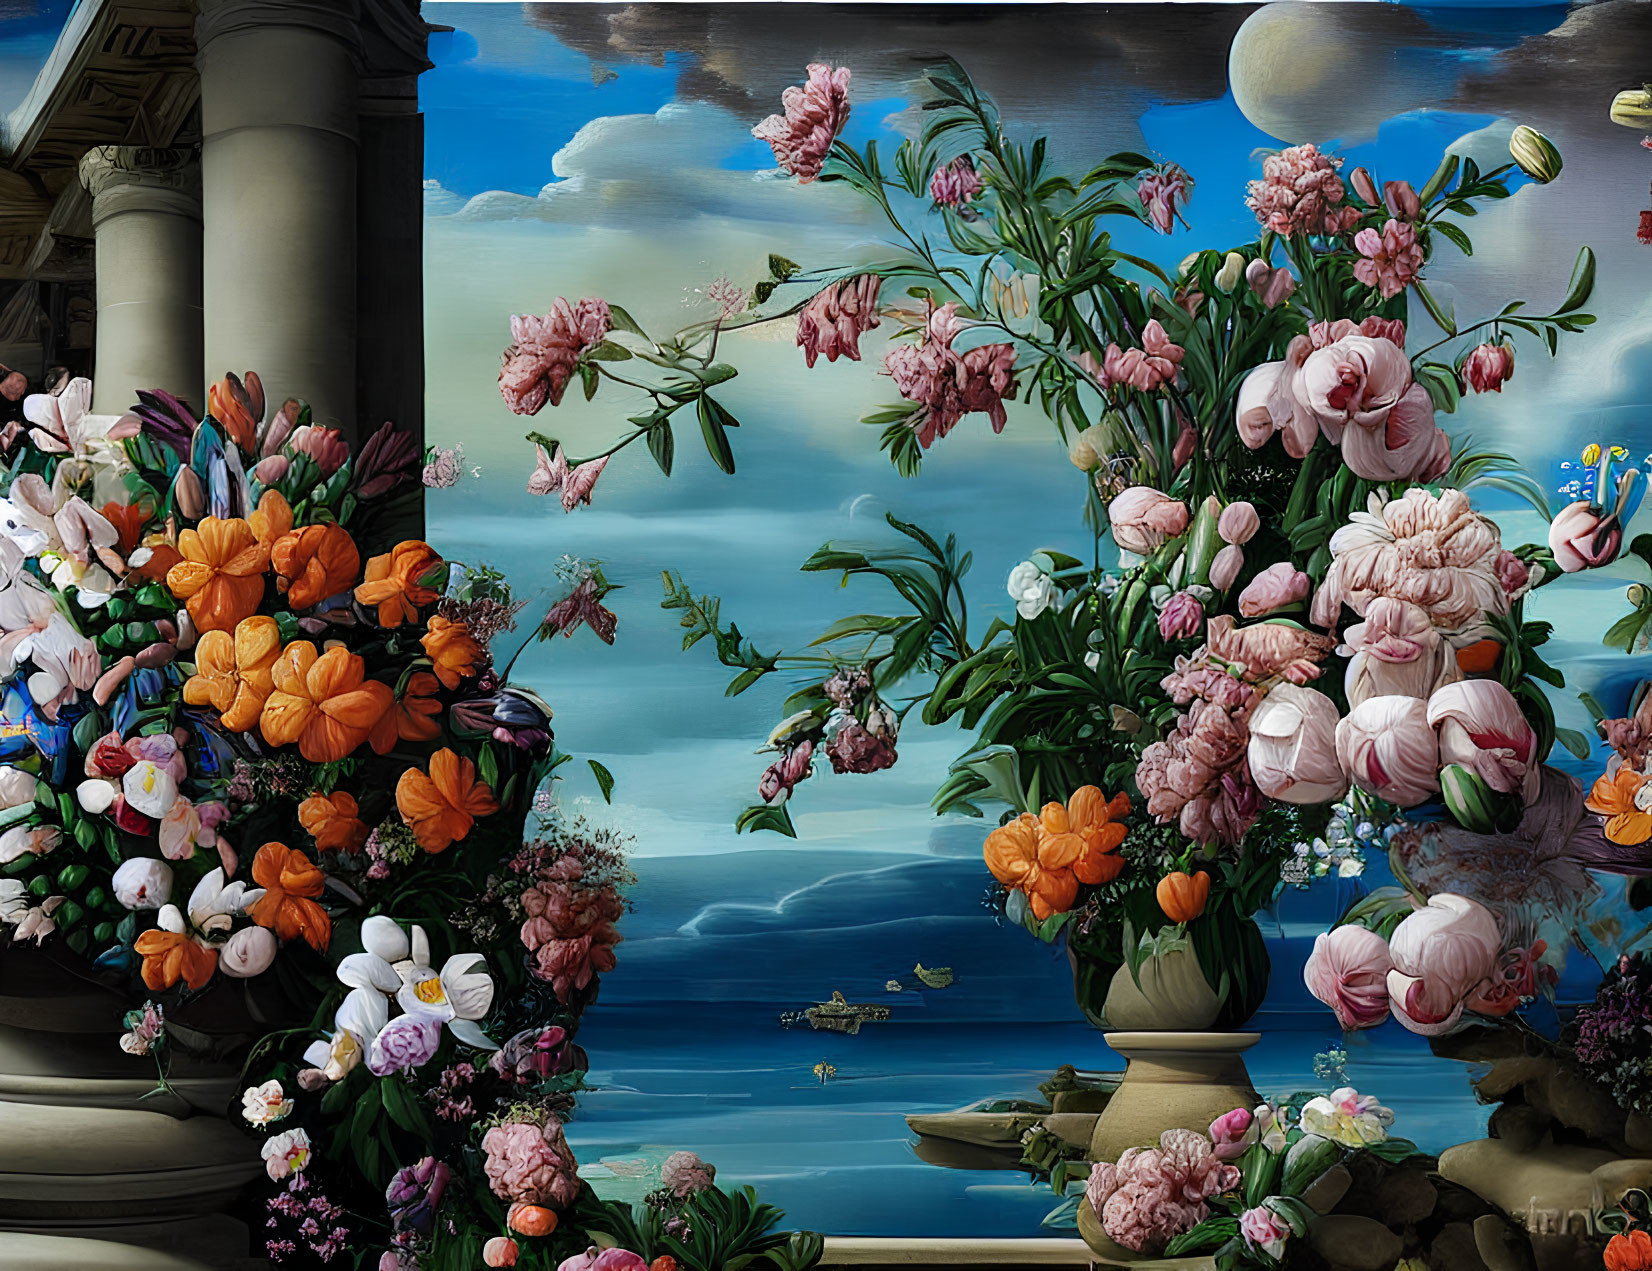 Colorful floral arrangements with water, columns, boat, sky, and celestial bodies.